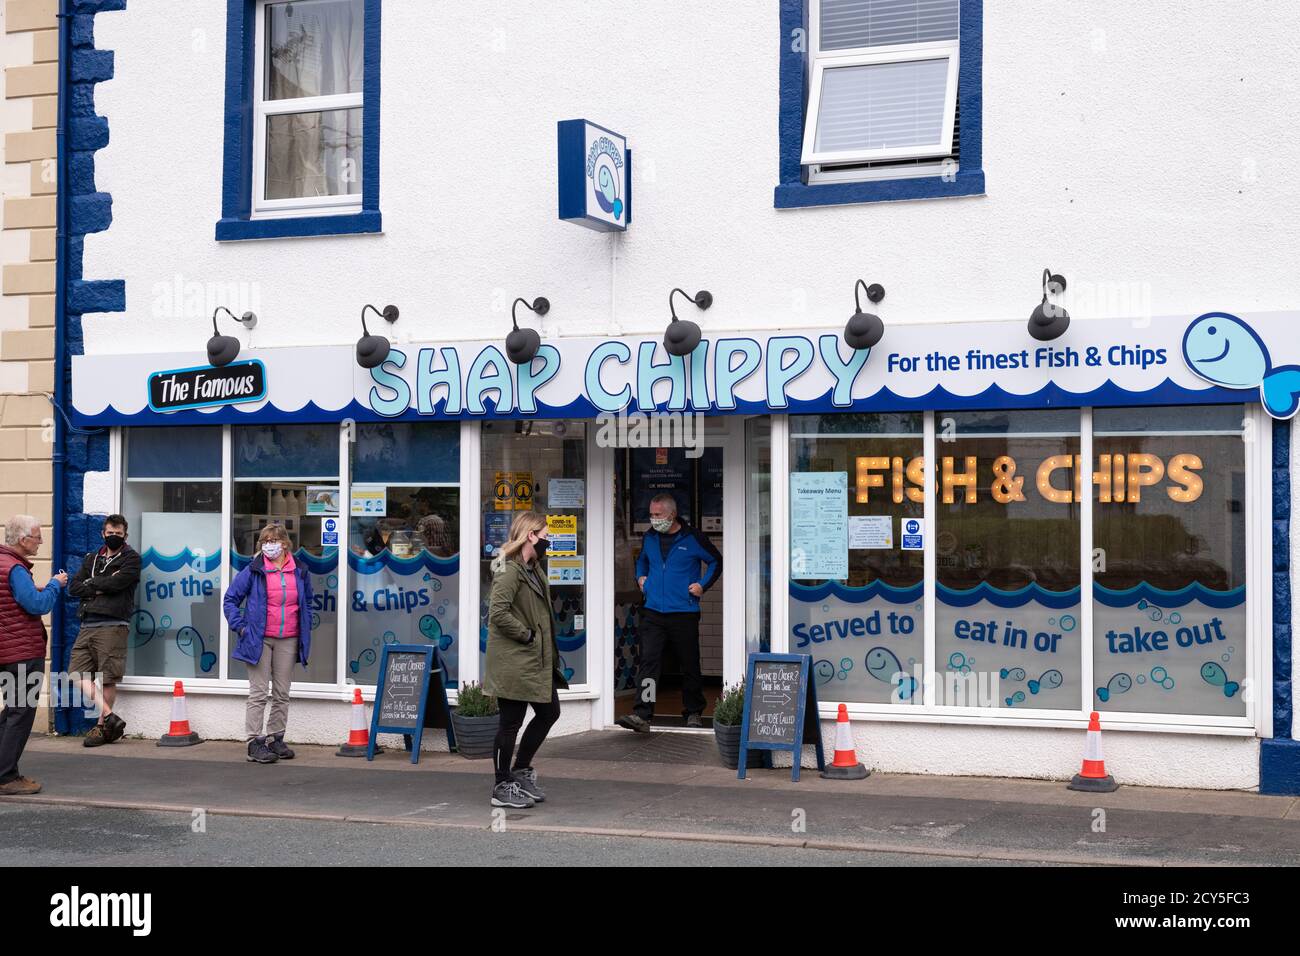 Shap Chippy, fish and chip shop - second place in the 2020 National Fish and Chip Shop of the Year -  Shap, Penrith, Cumbria, England, UK Stock Photo